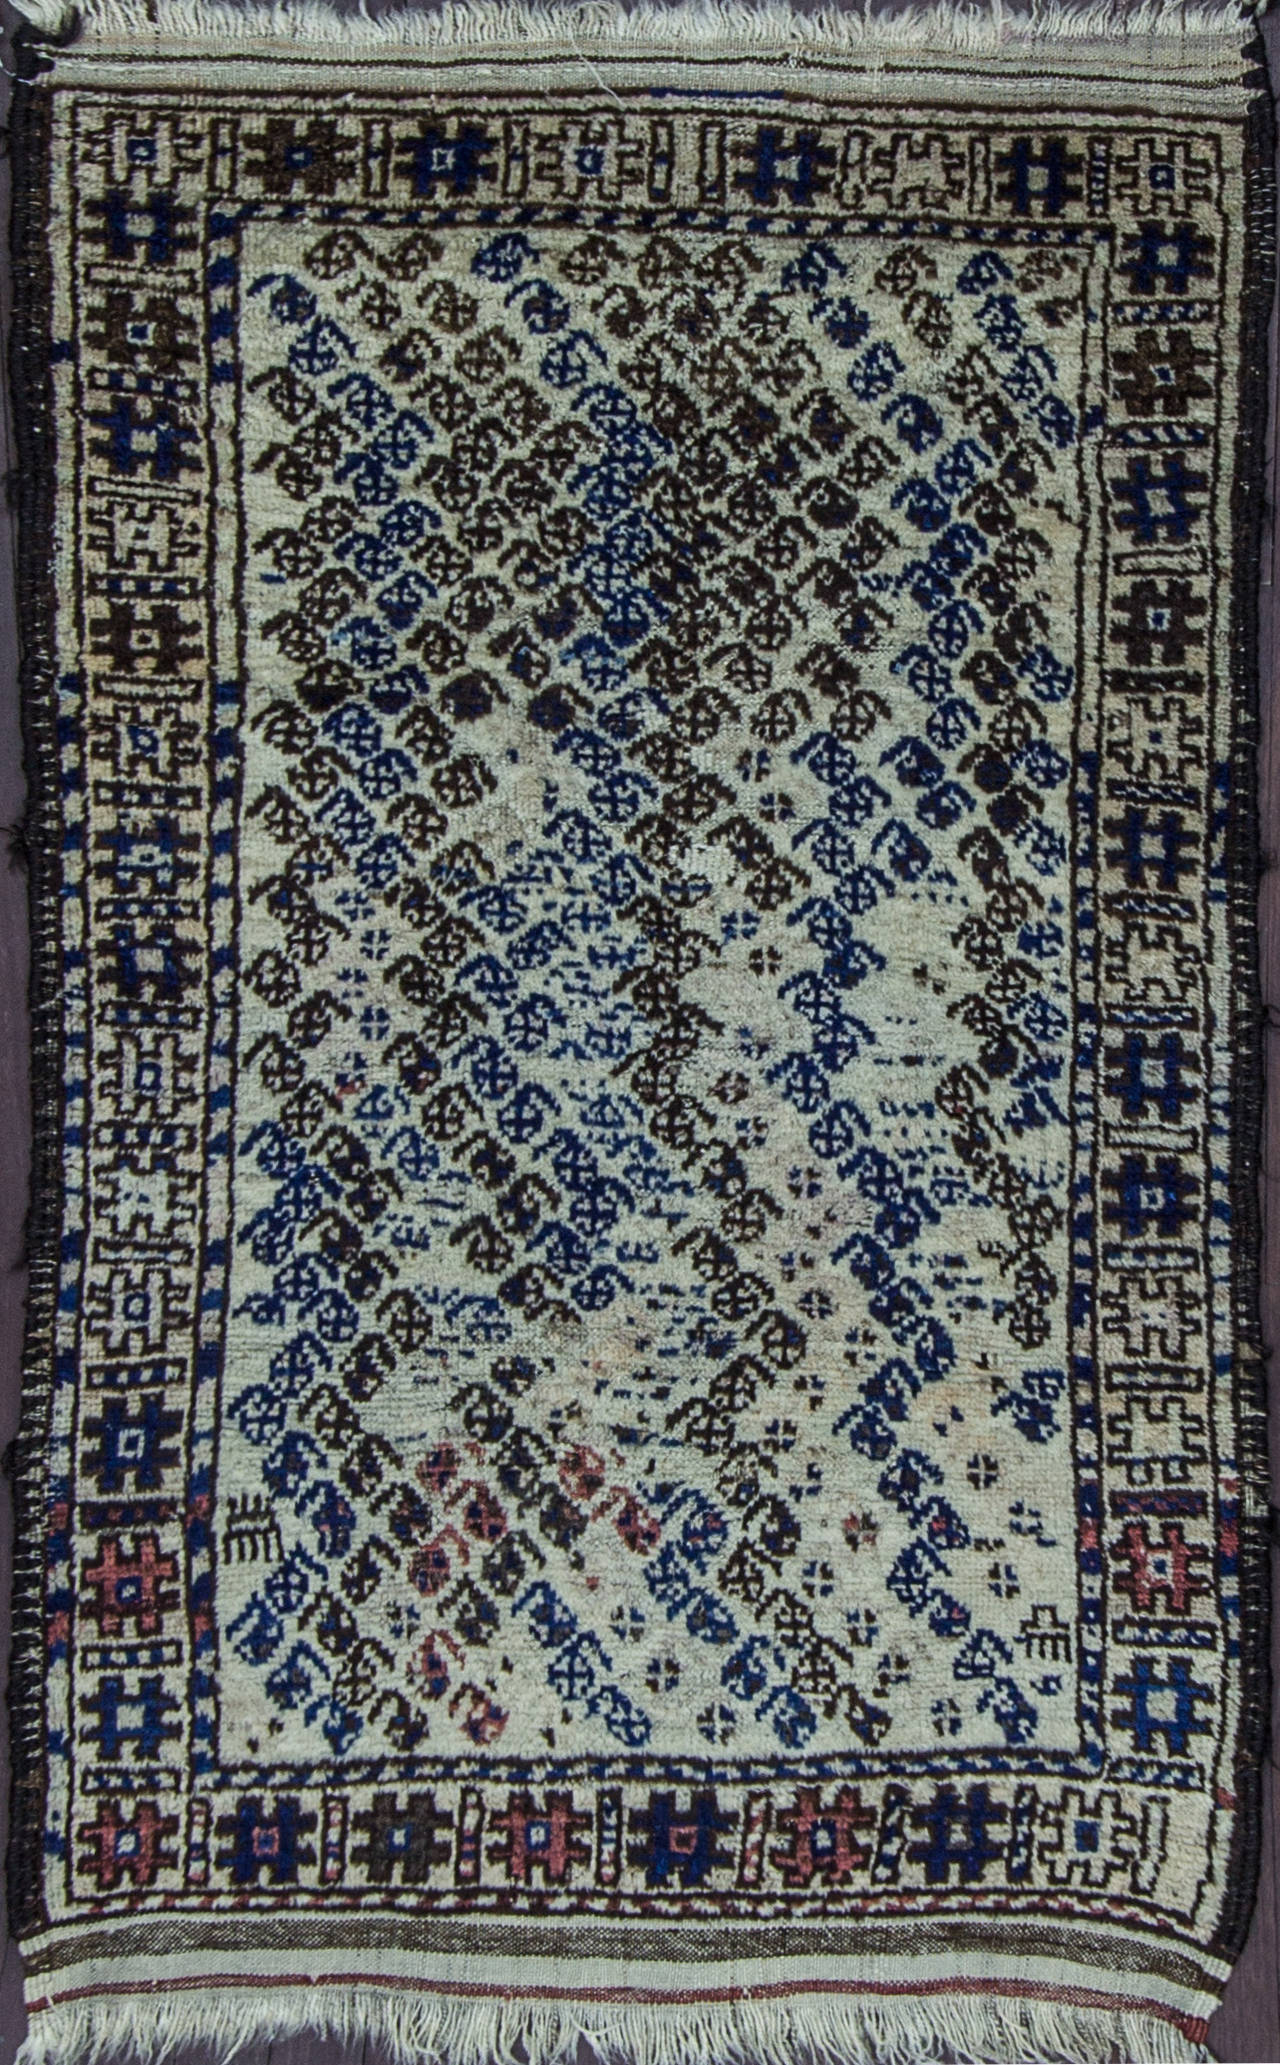 Belouch rugs rather than originating from one specific area and they have wide range of styles. But a distinct style of itself. The historical region of Baluch rugs is Baluchistan, is no longer an independent, autonomous region. Today, this